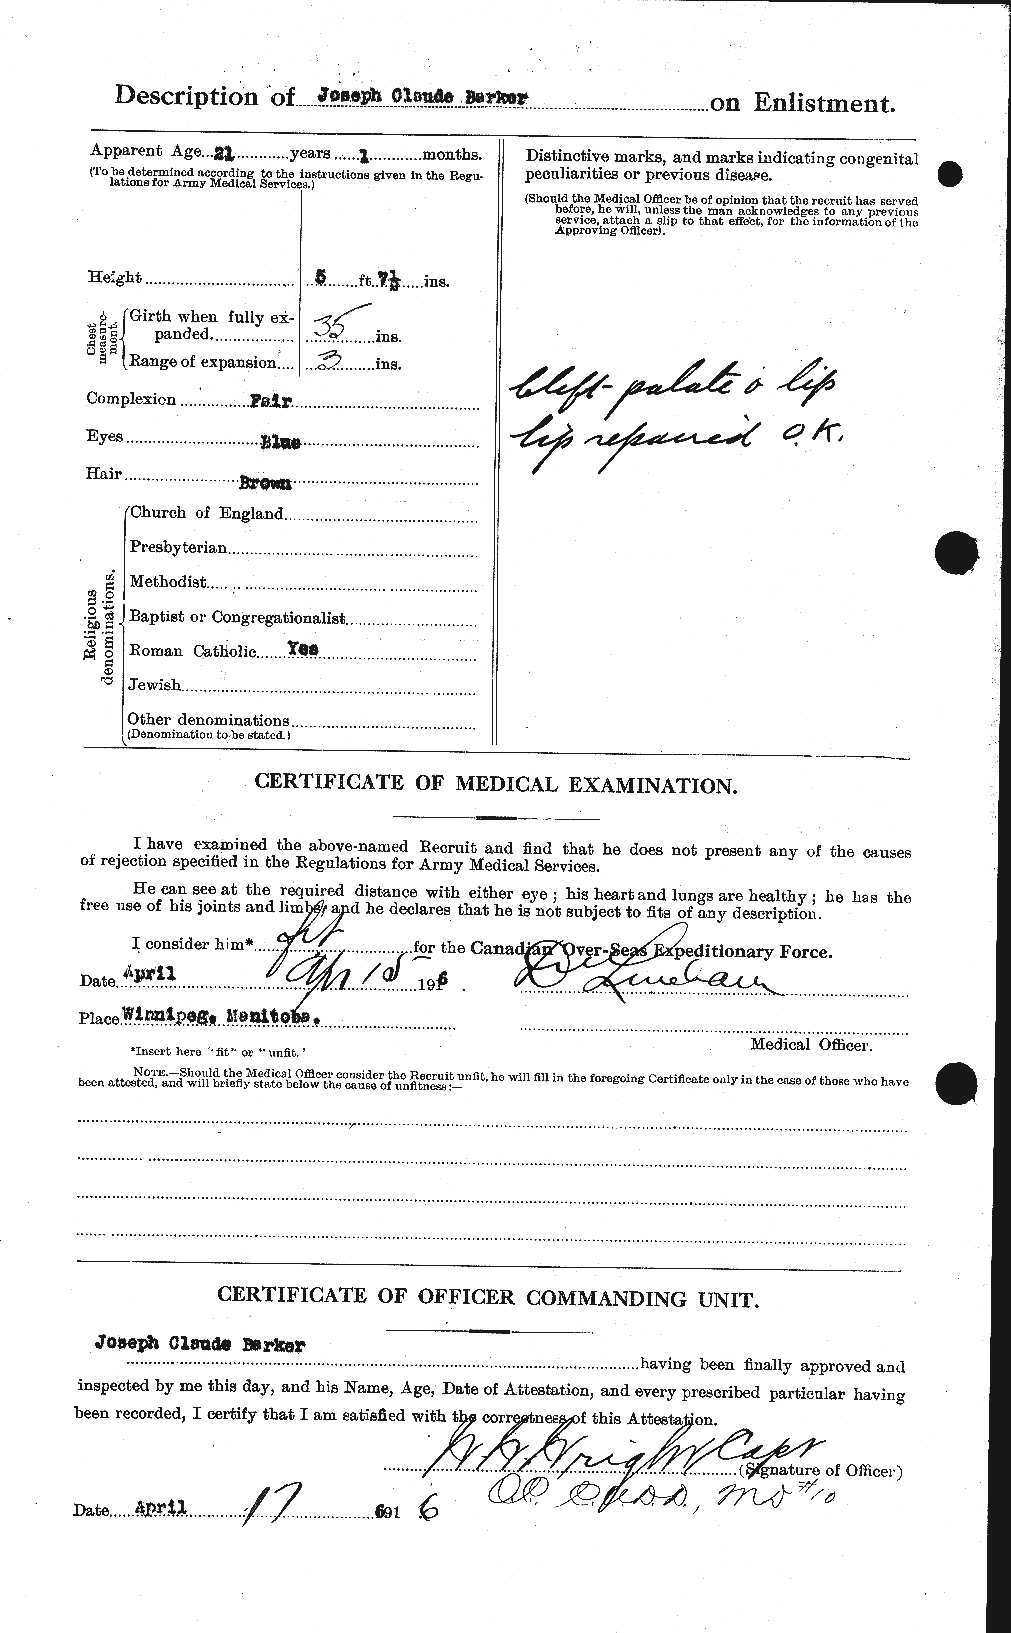 Personnel Records of the First World War - CEF 227003b